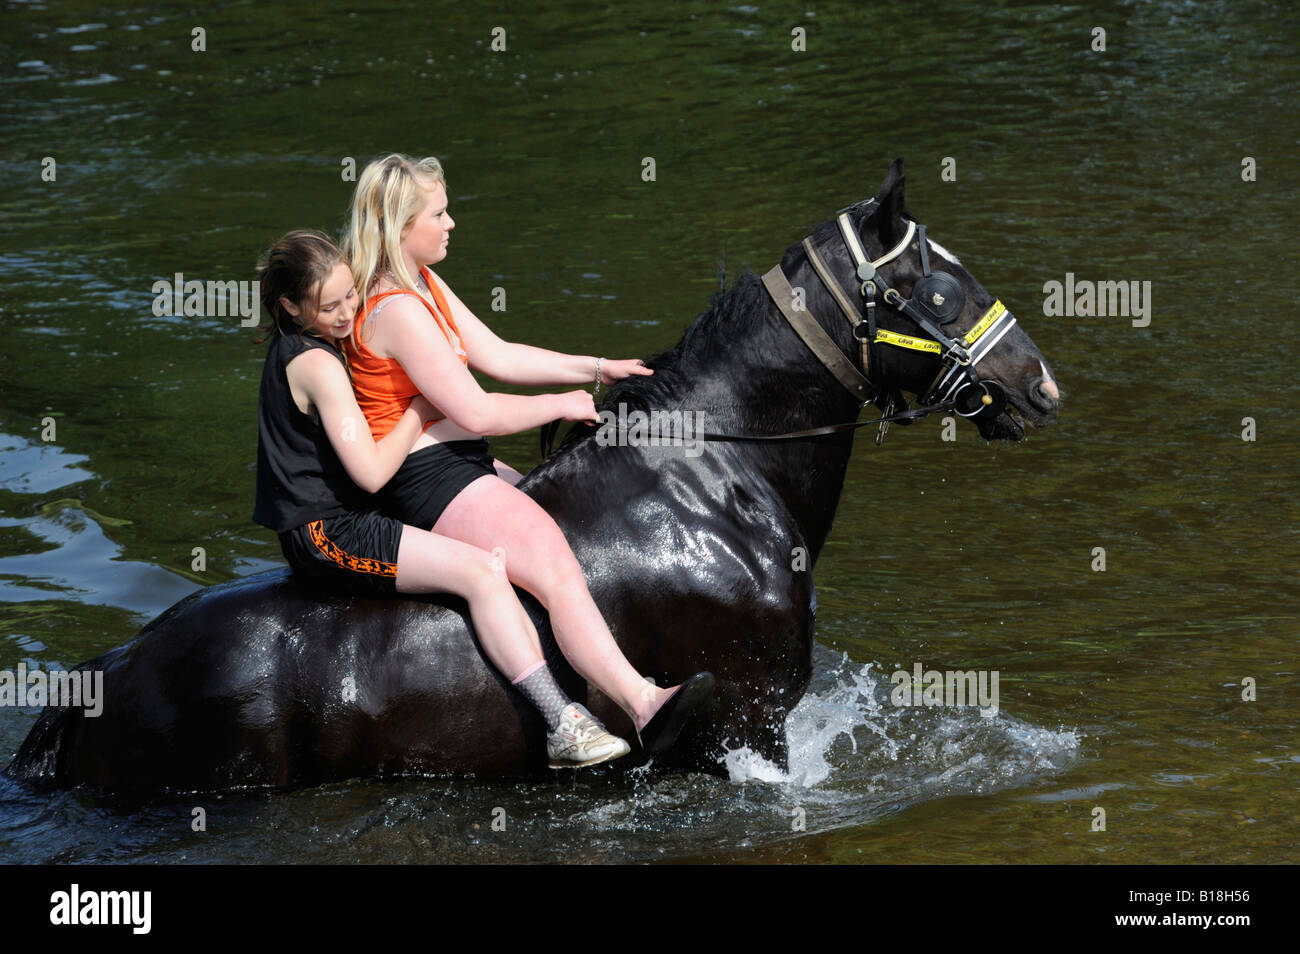 Two gypsy traveller girls riding a horse in the River Eden. Appleby Horse Fair. Appleby-in-Westmorland, Cumbria, England. Stock Photo